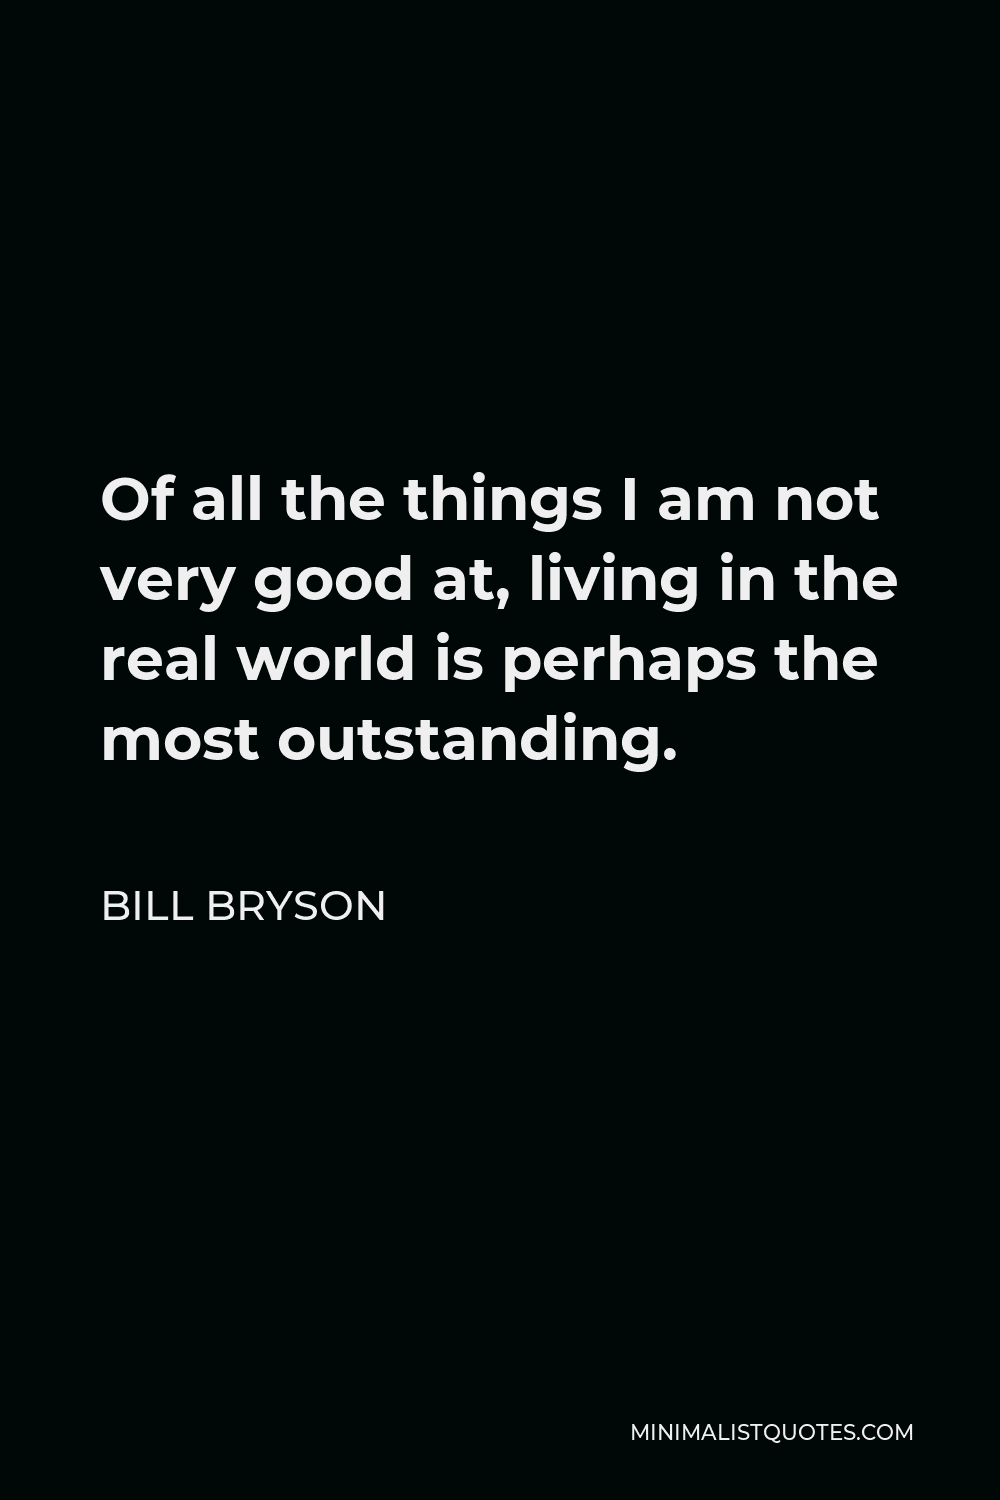 Bill Bryson Quote - Of all the things I am not very good at, living in the real world is perhaps the most outstanding.